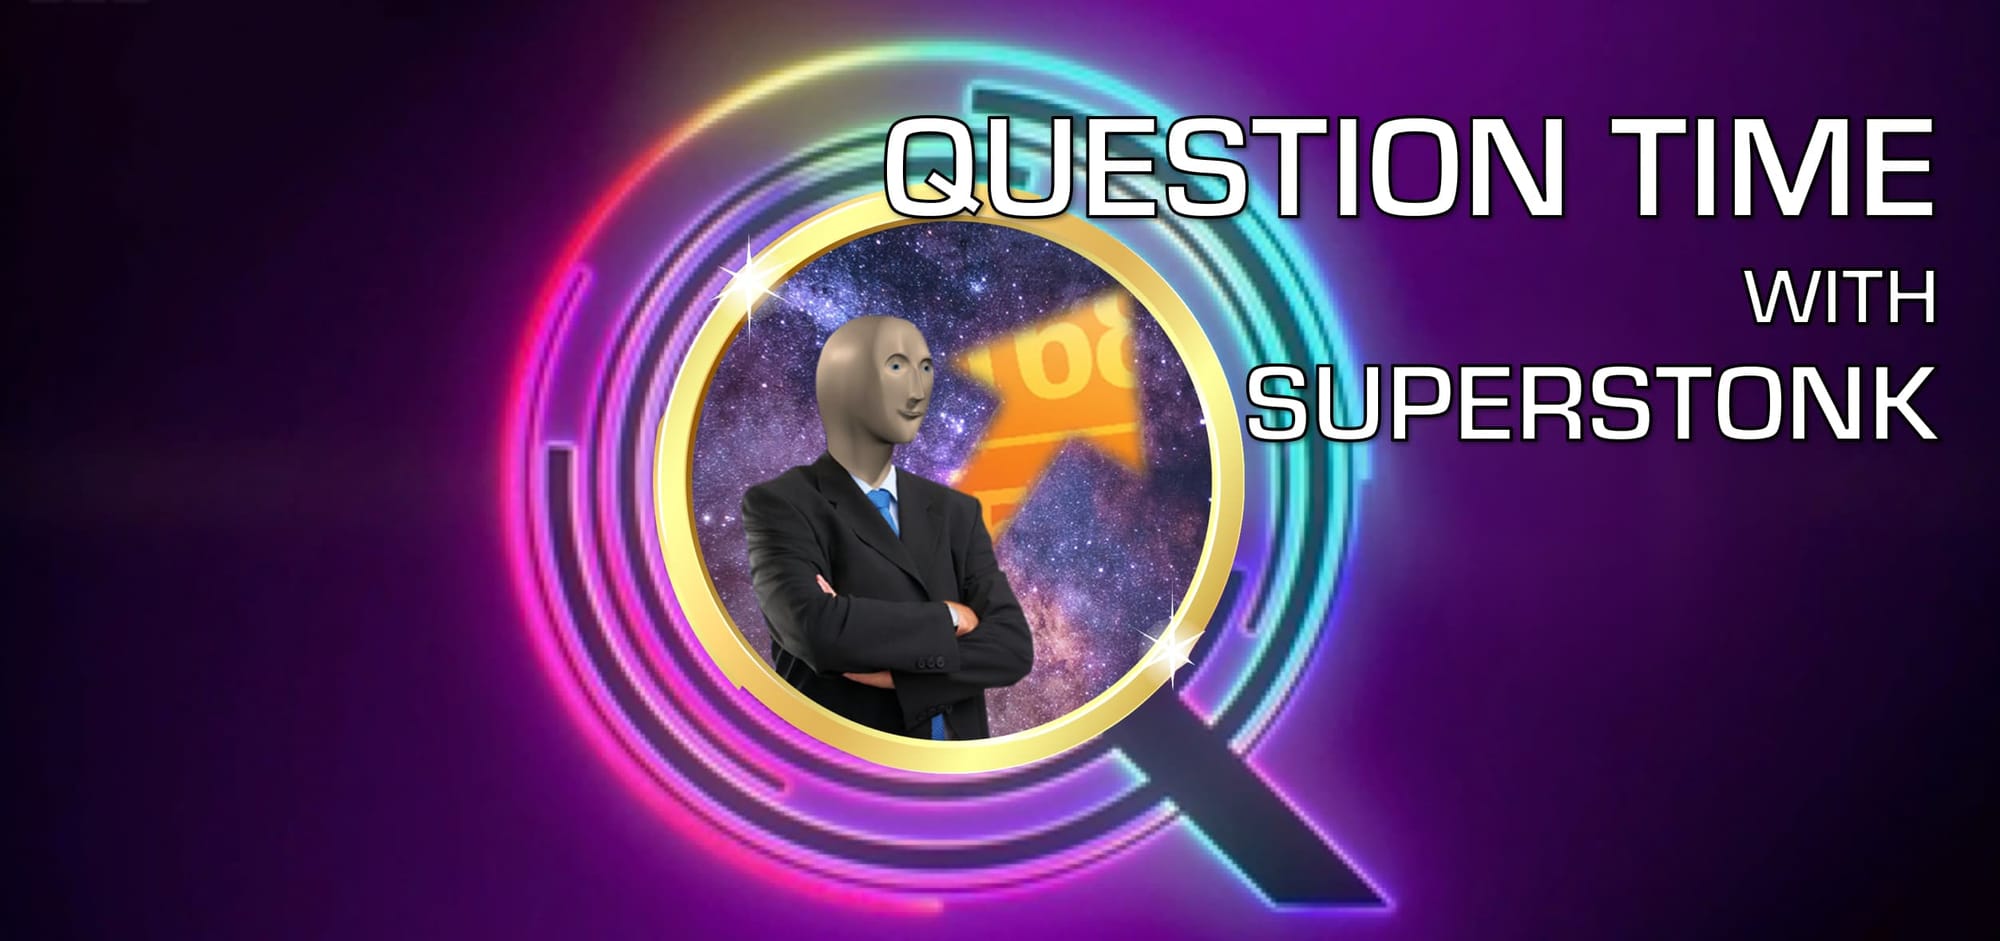 QUESTION TIME WITH SUPERSTONK